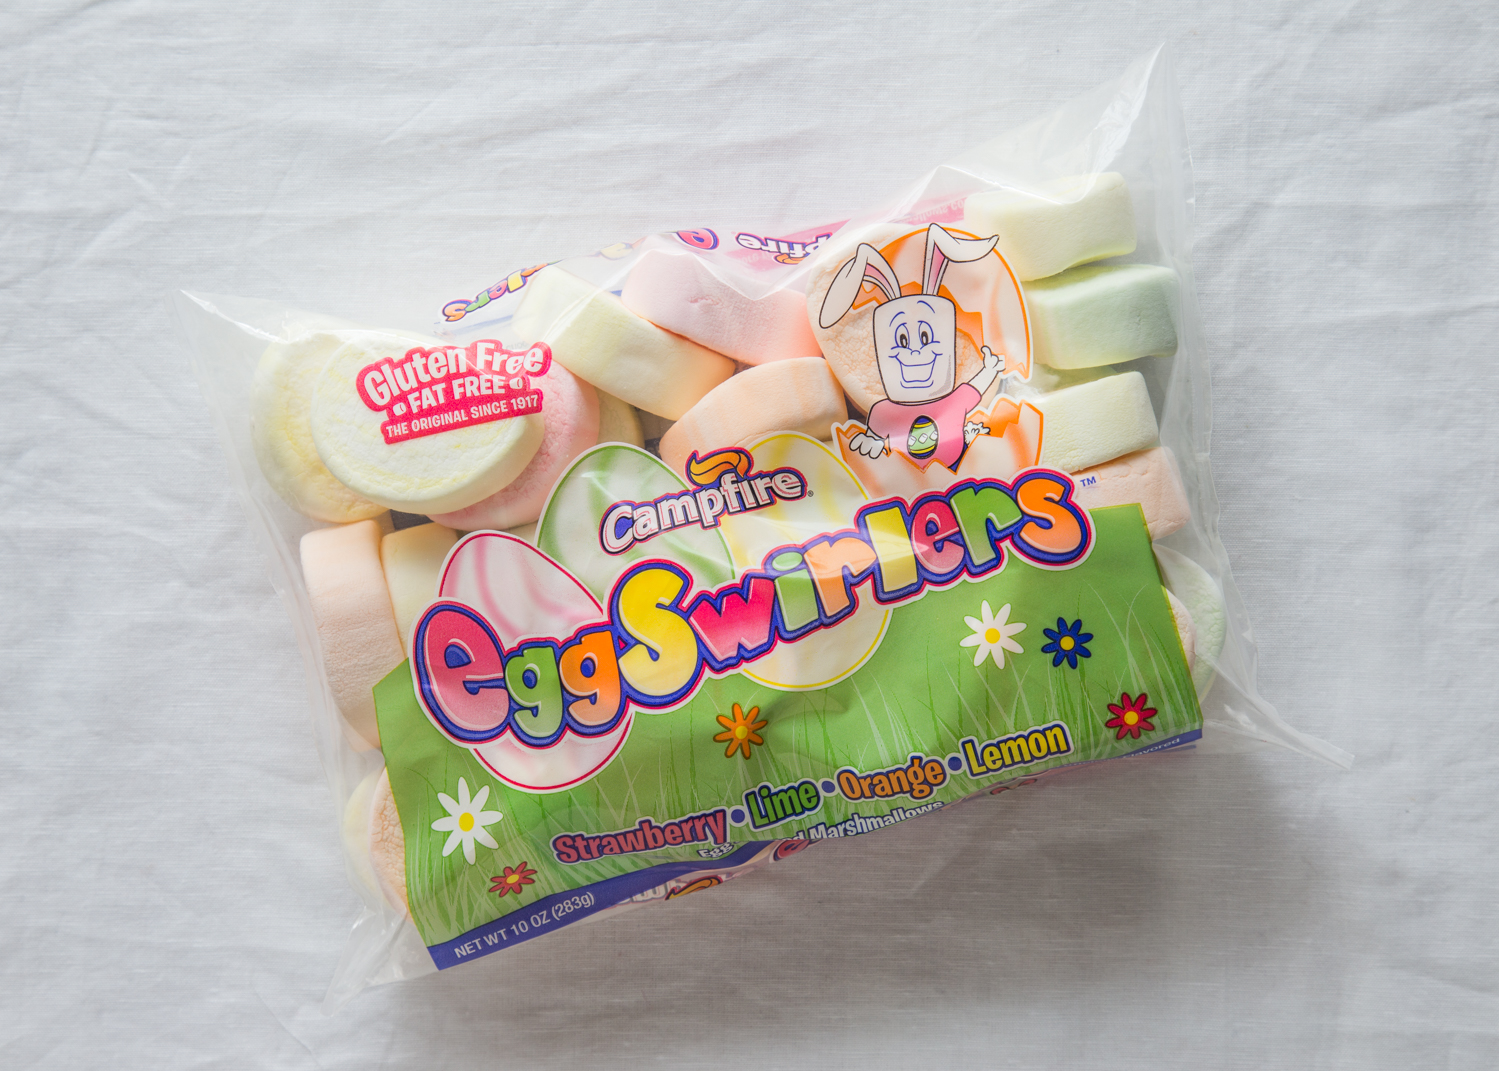 Campfire® Eggswirlers make the sweetest Fruity Mallow Cups for Easter!